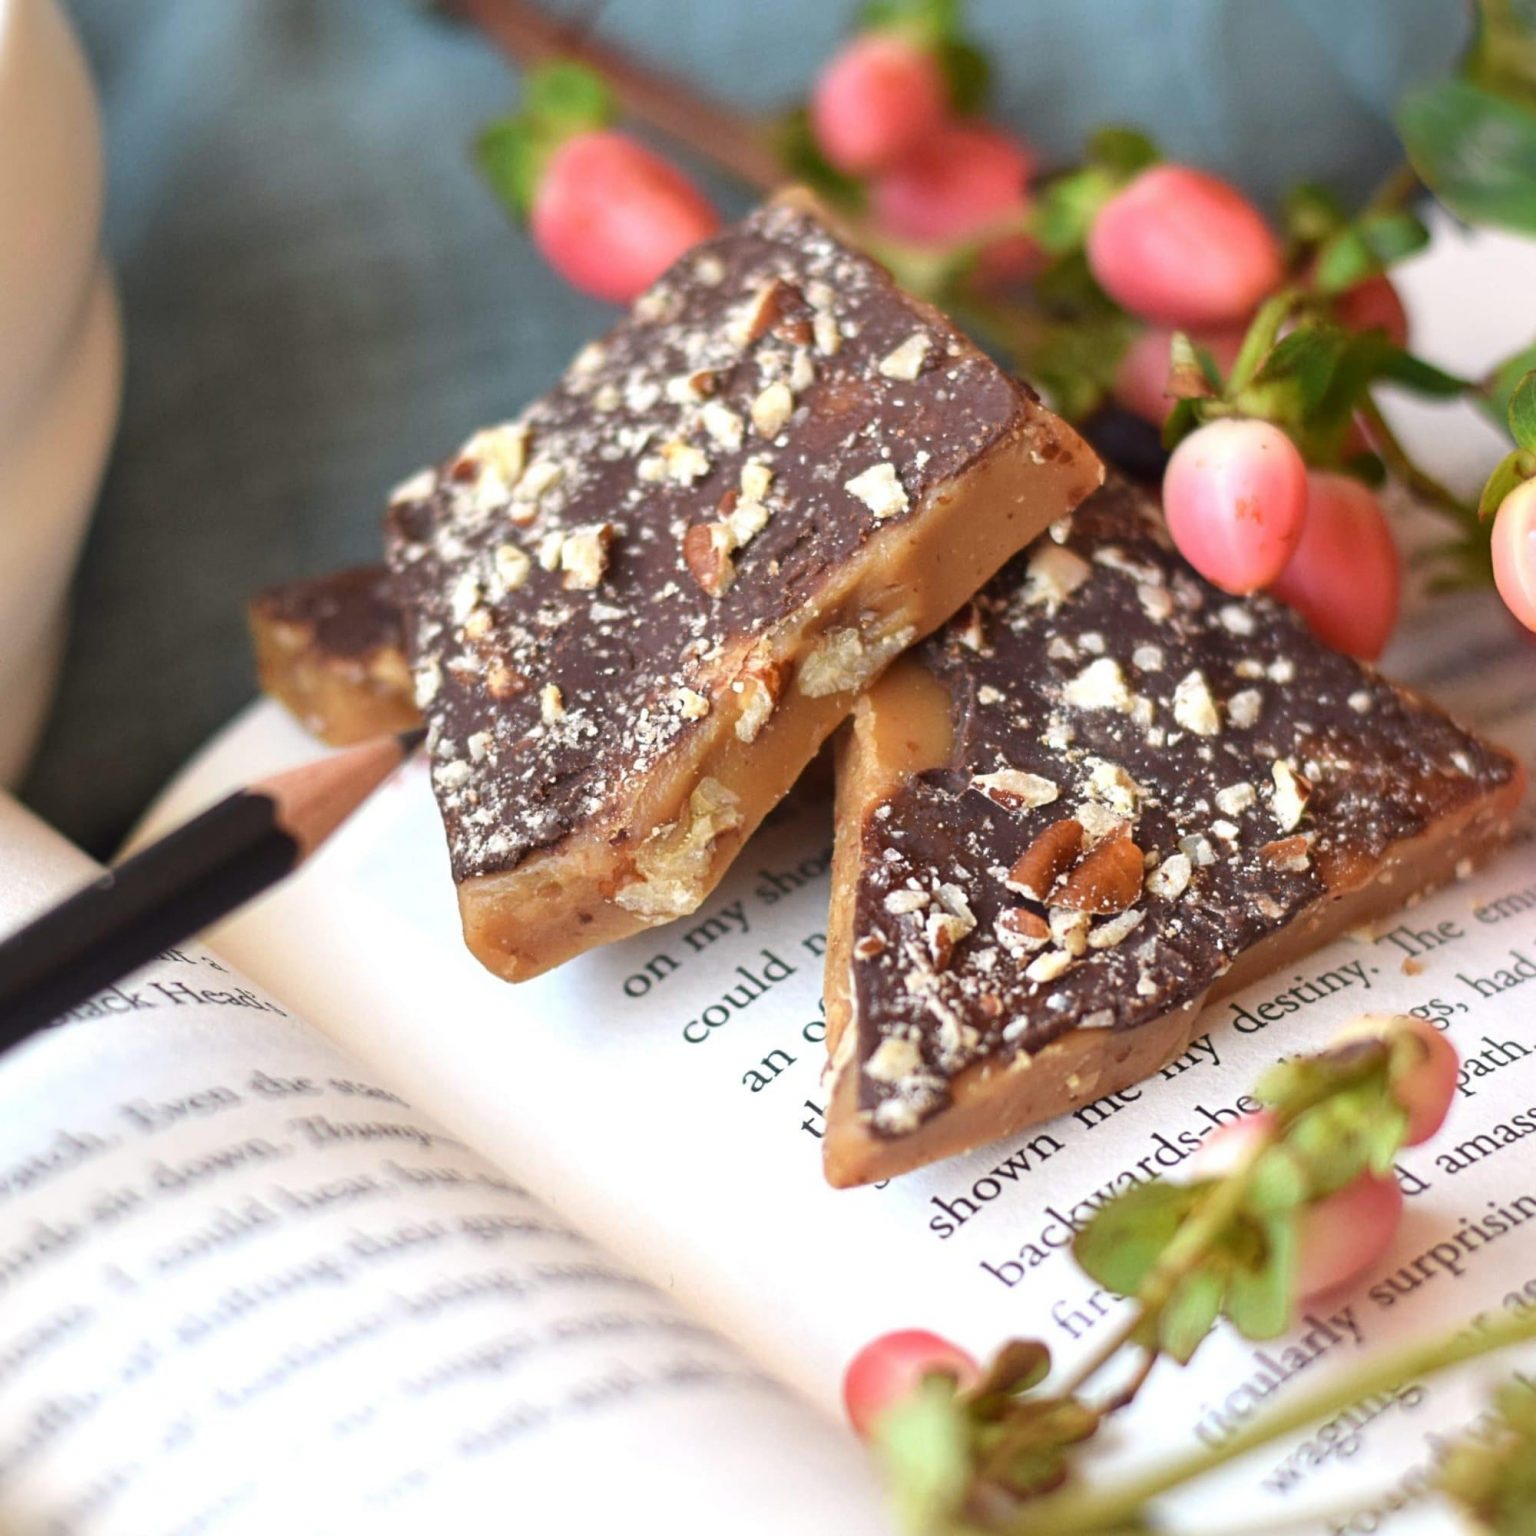 3 pieces of English toffee with gourmet dark chocolate spread on top and then sprinkled with chopped pecans. Pink flower buds are in the foreground and background